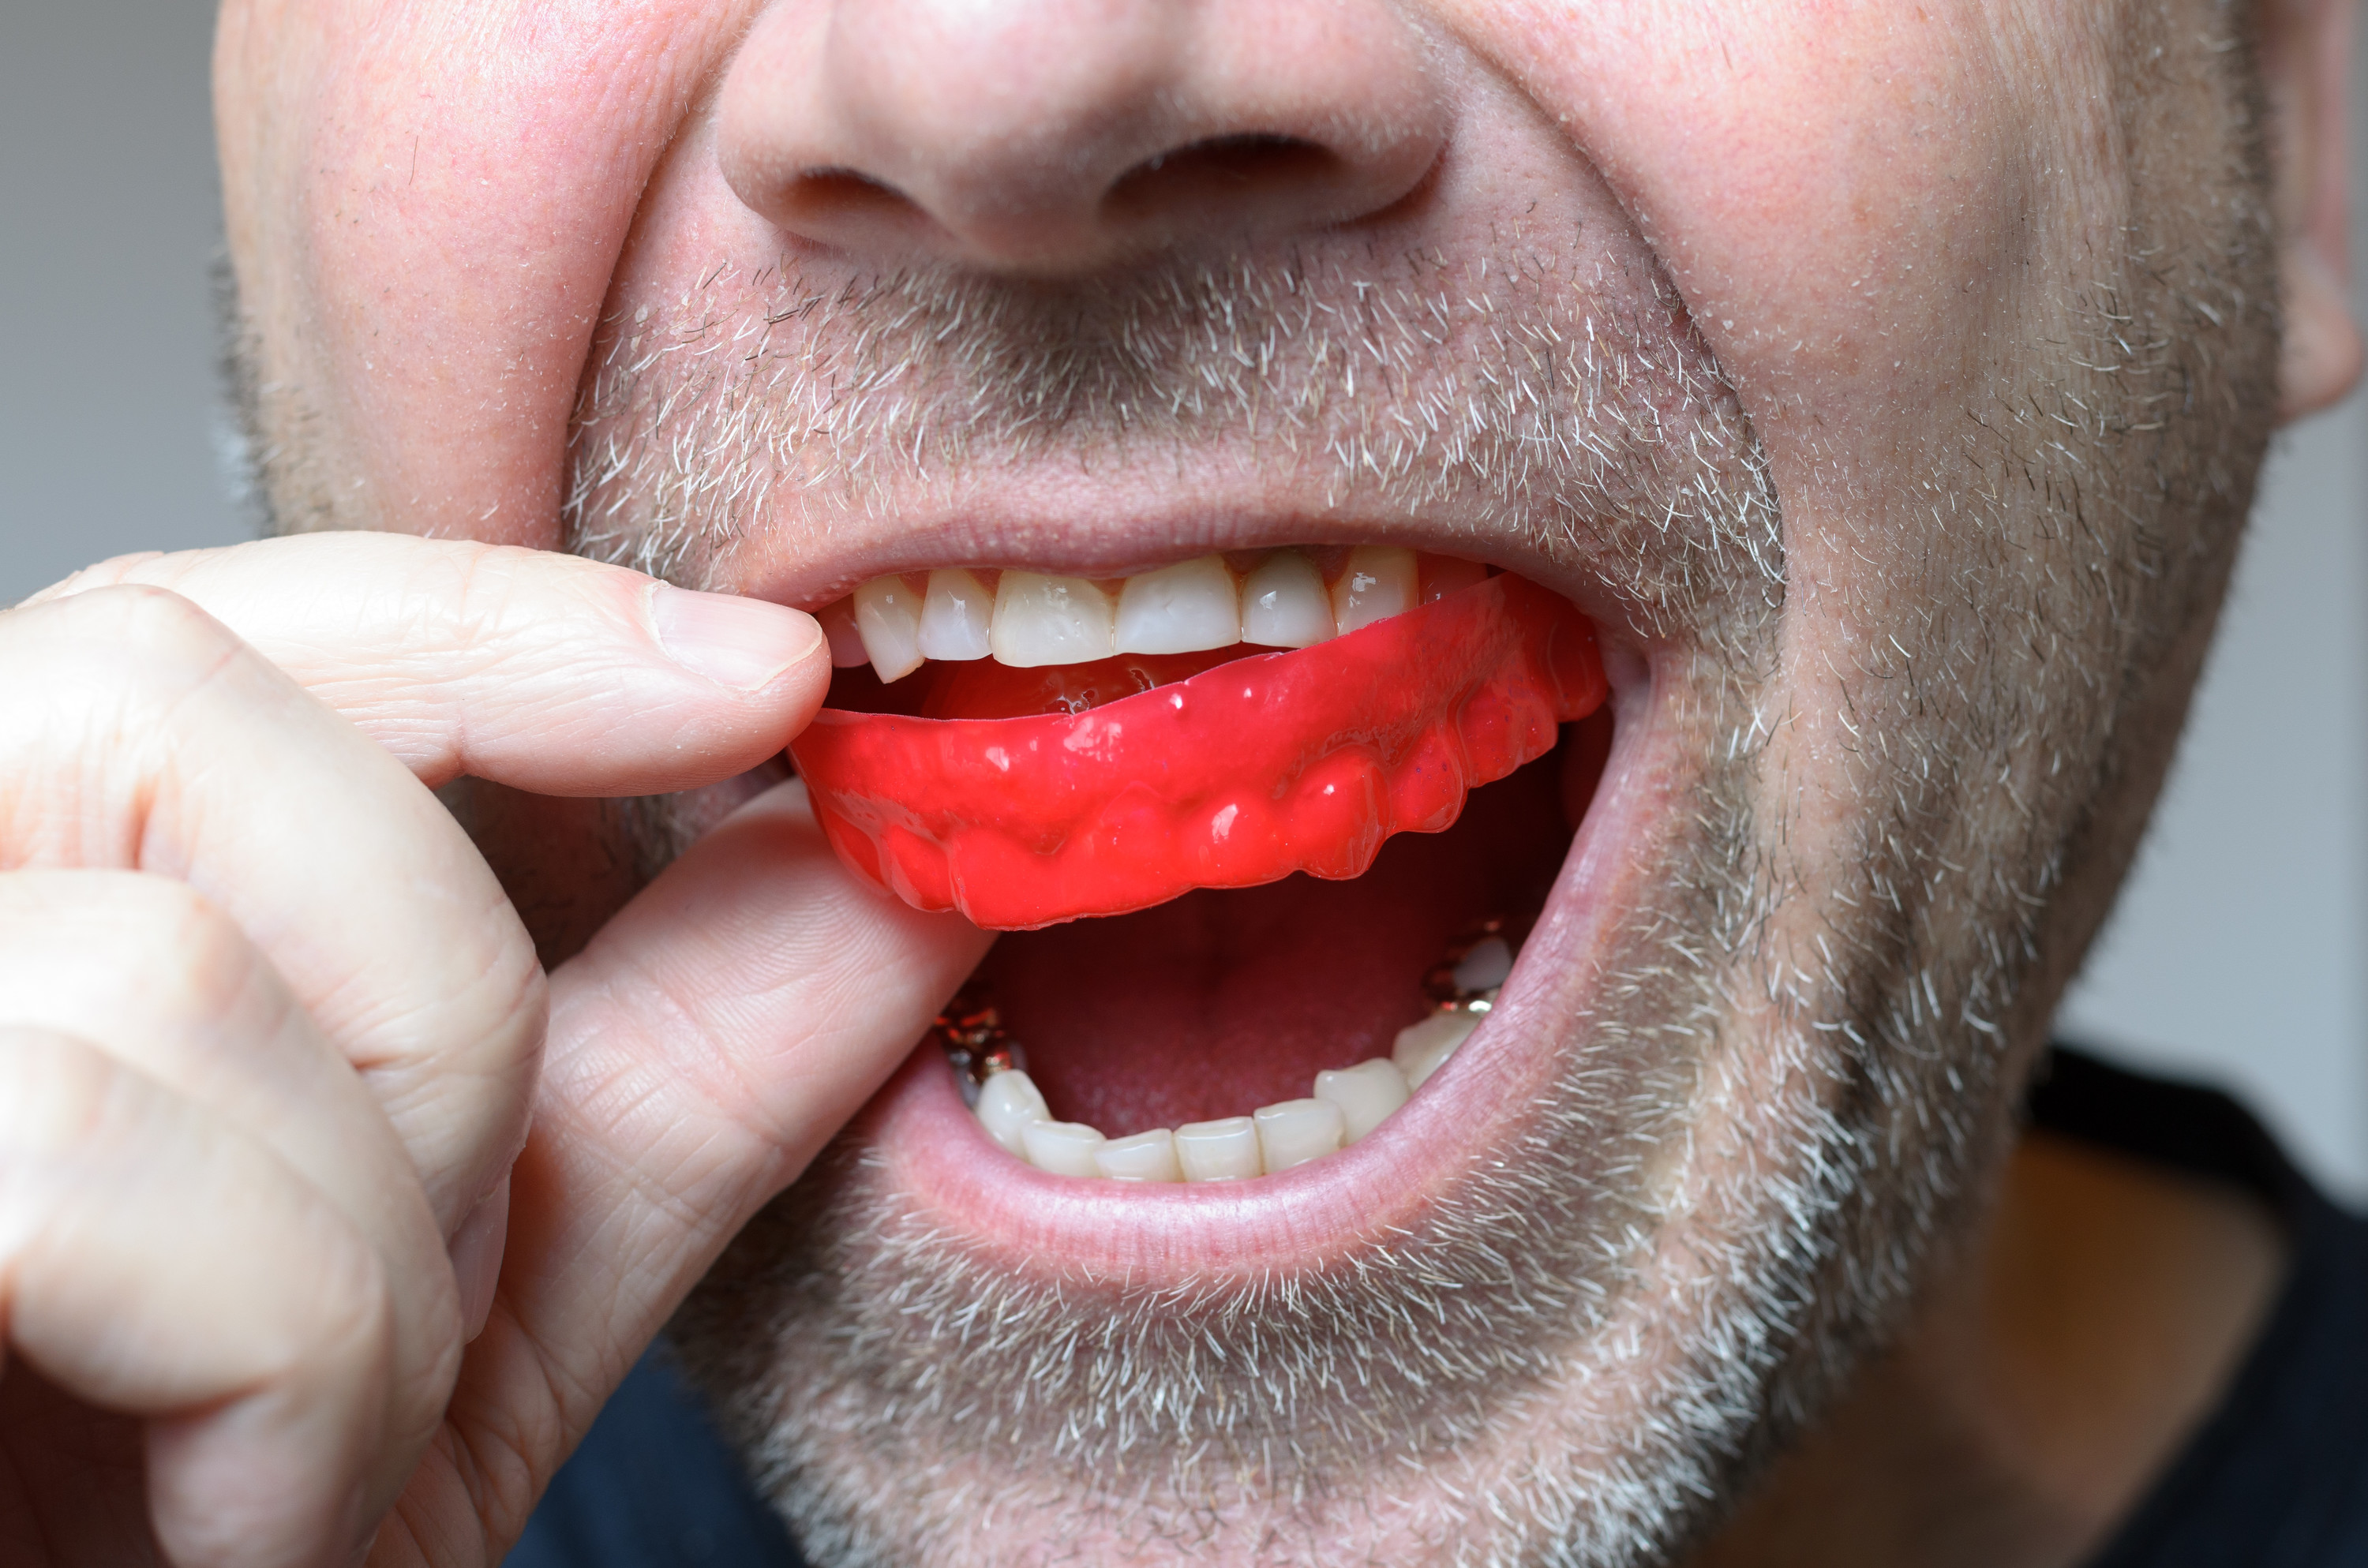 mouthguards affect your orthodontic health